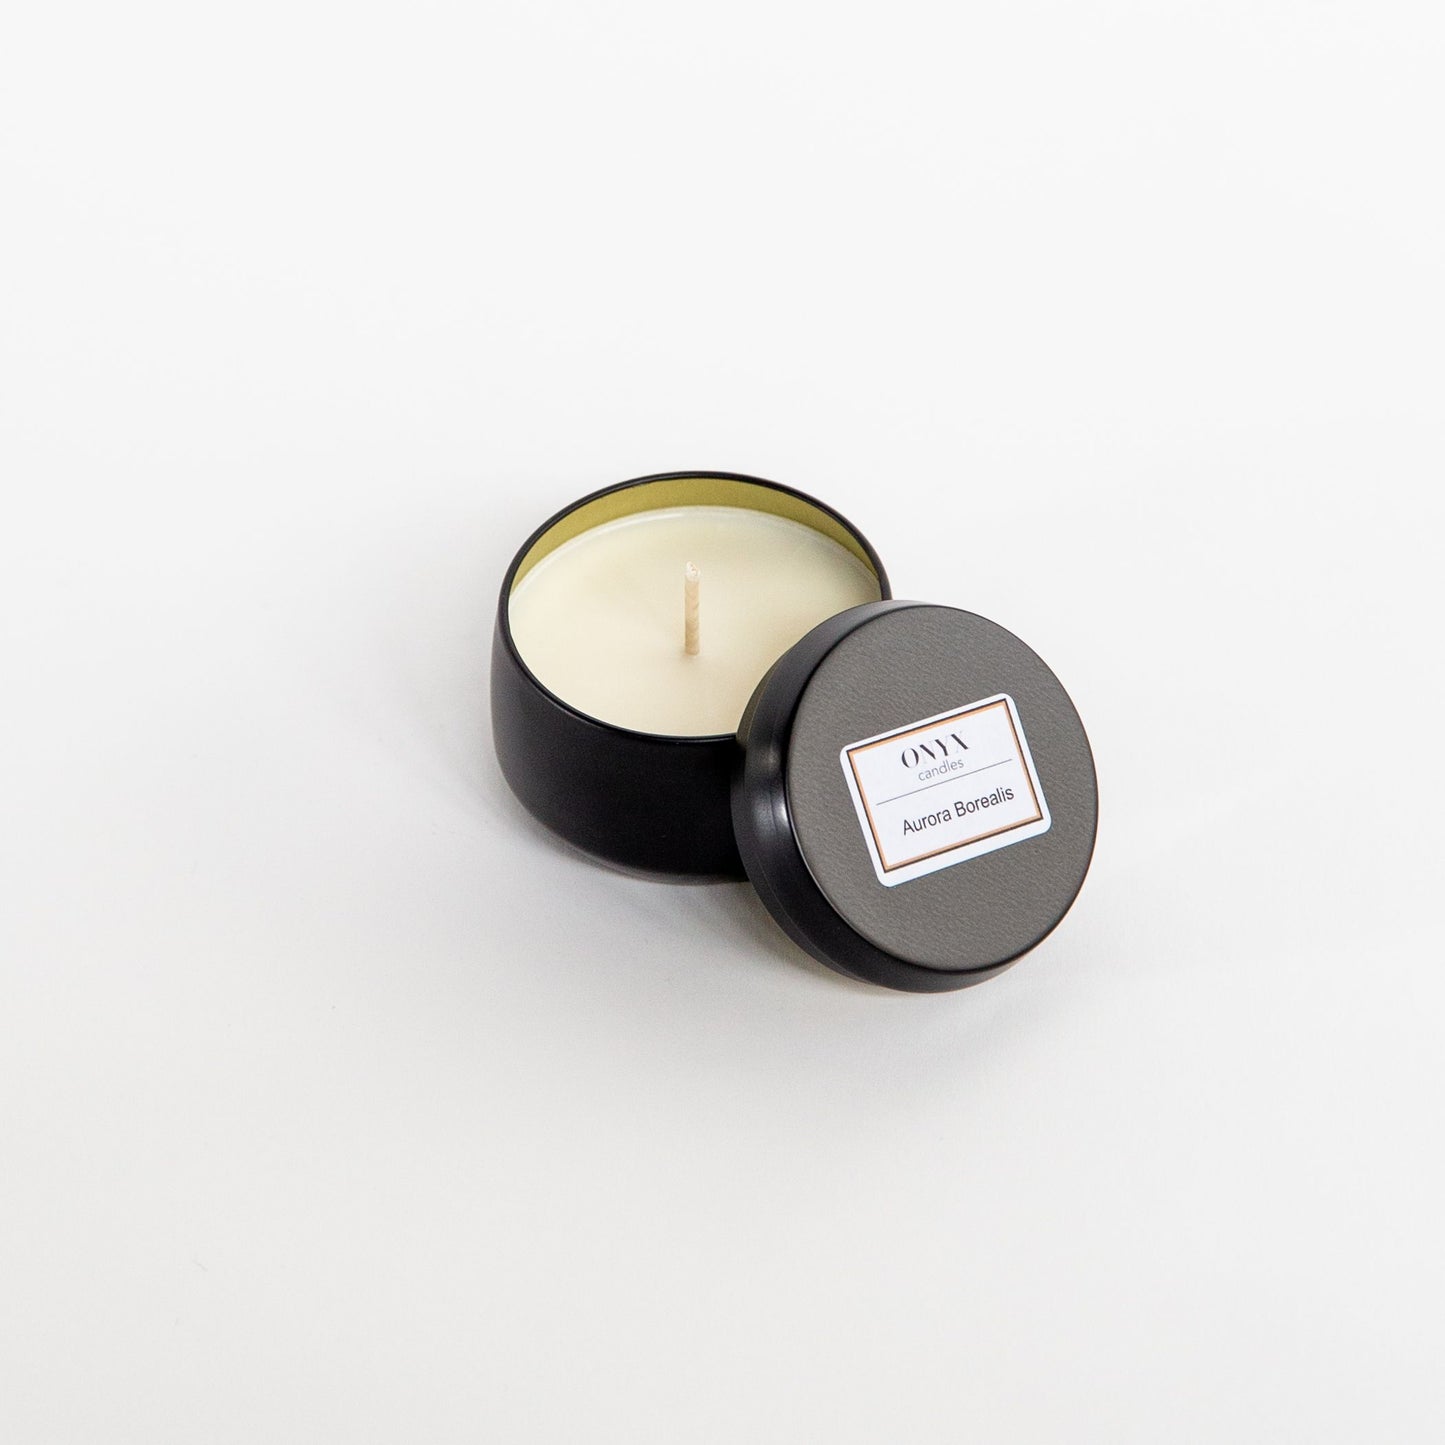 Pictured here is a 4 oz matte black tin candle, in the scent Aurora Borealis